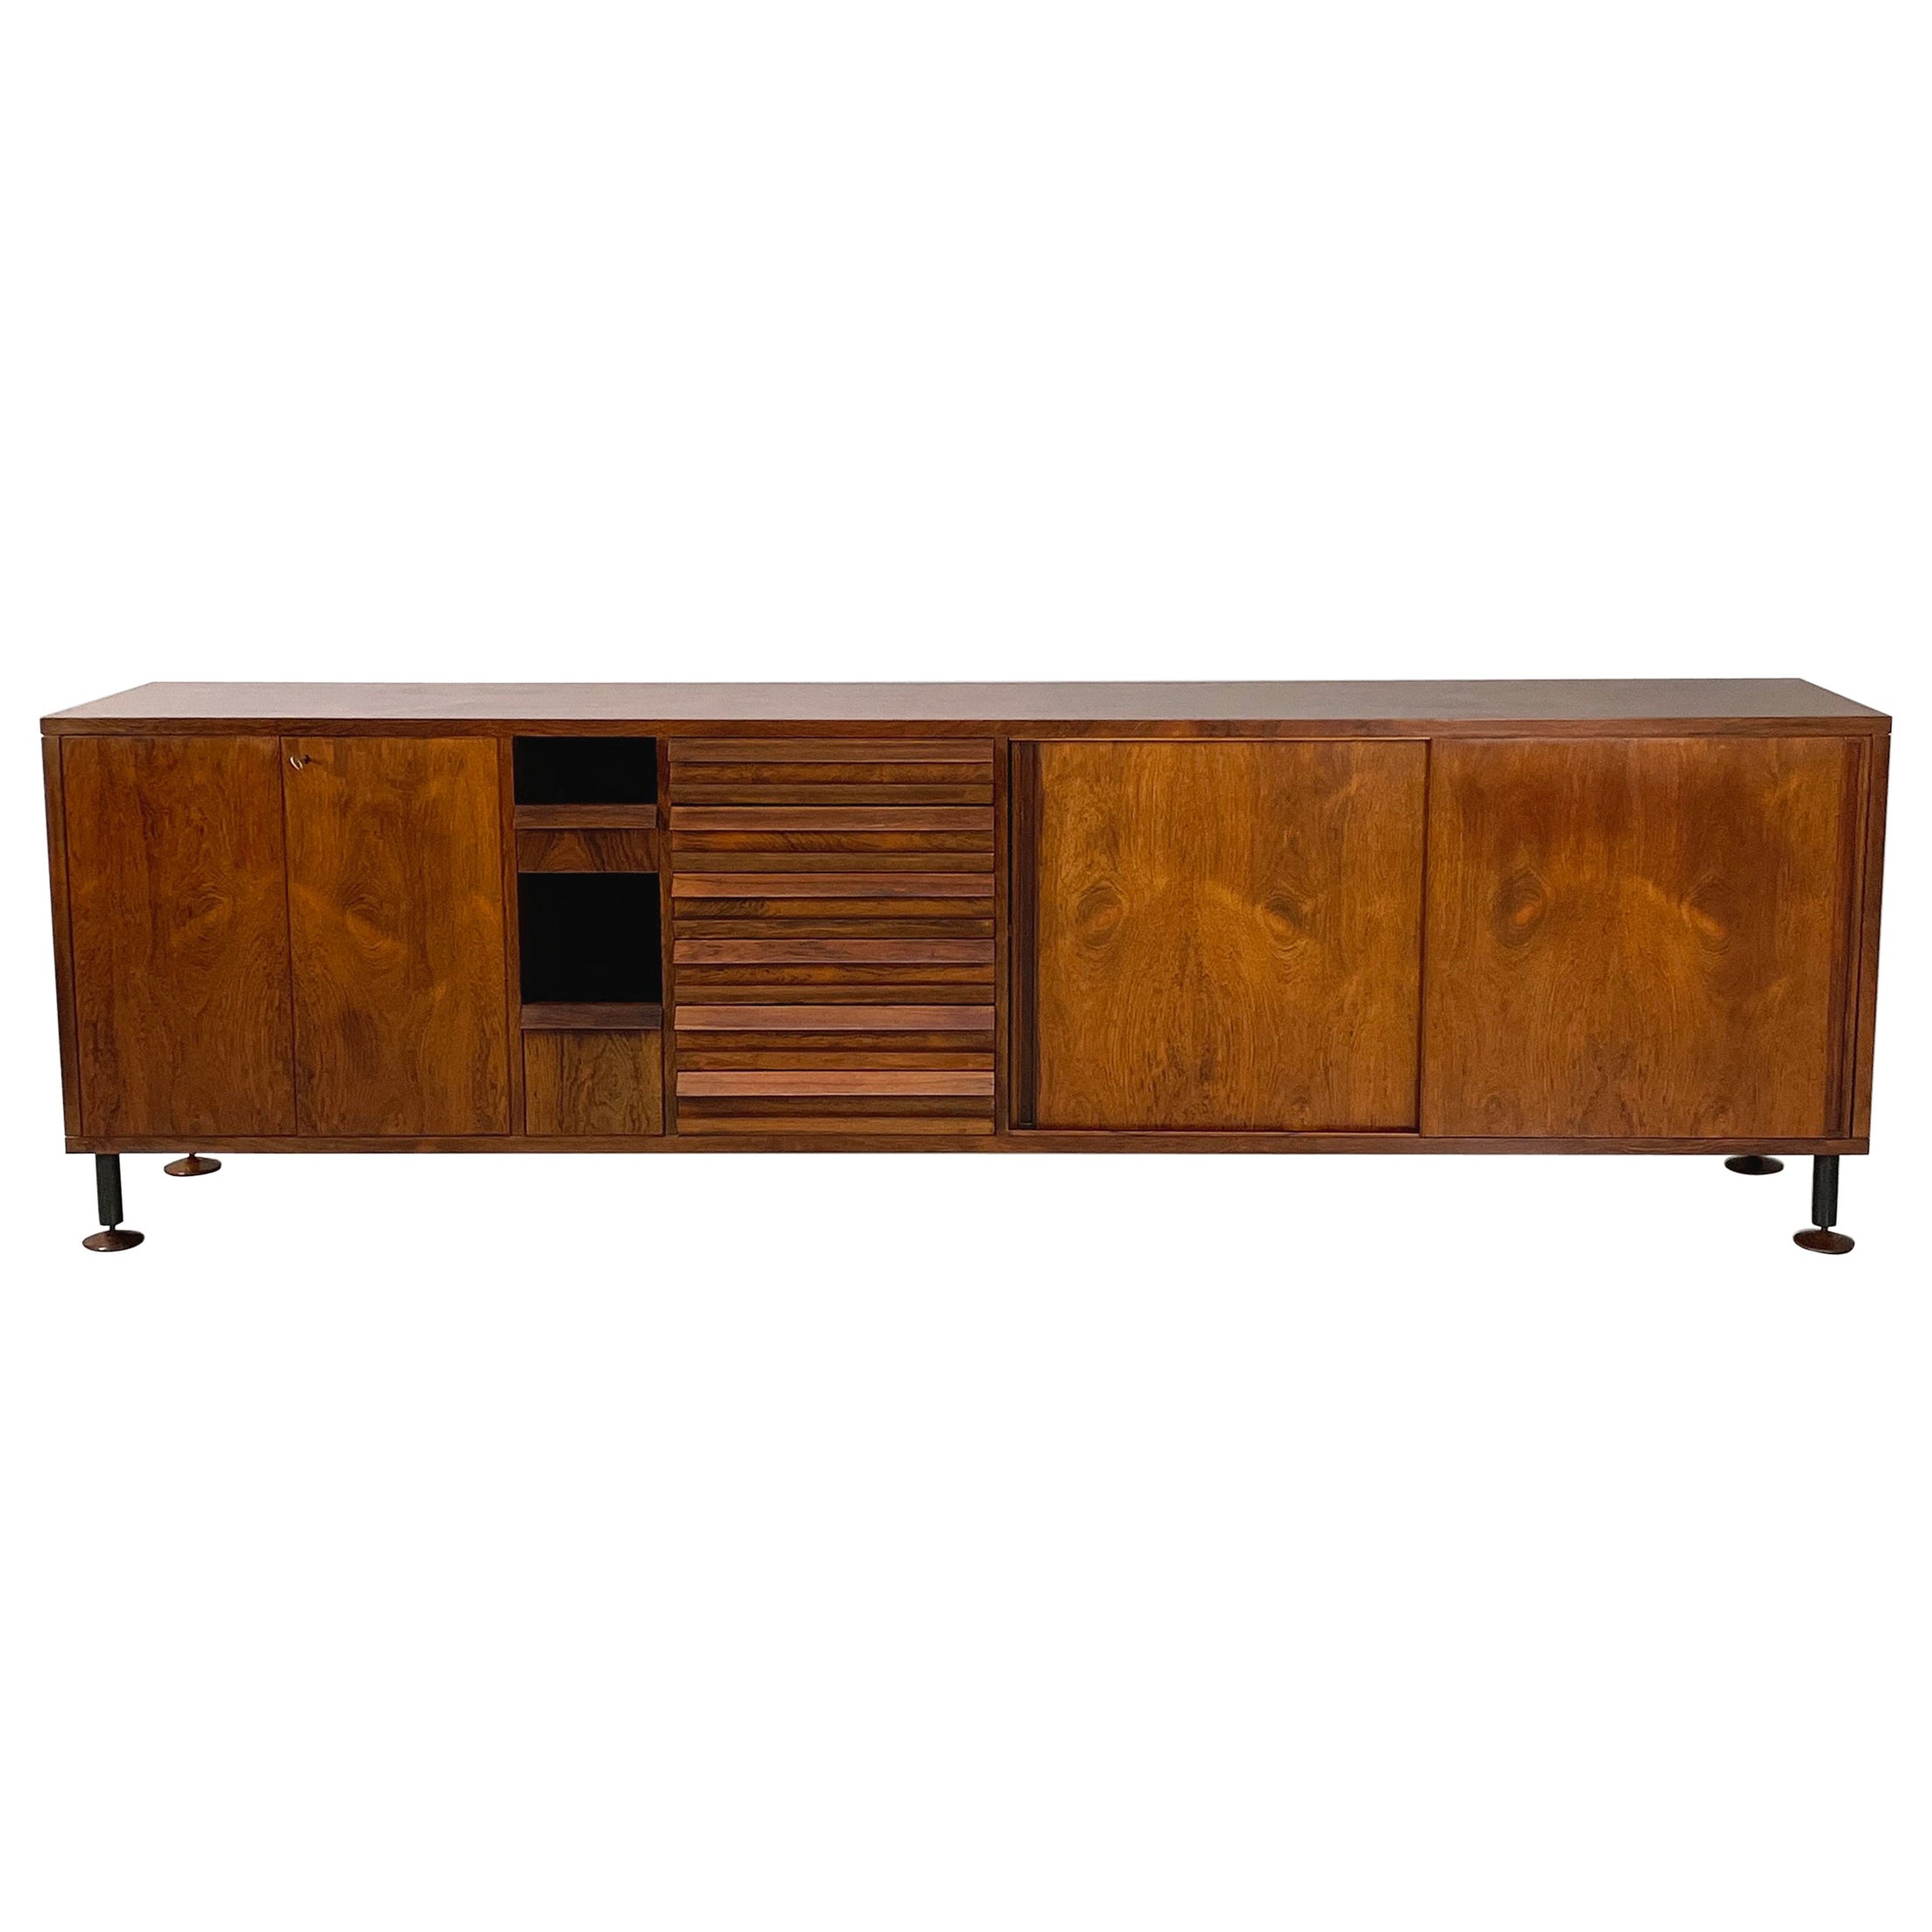 Italian mid-century modern Wooden sideboard with drawers and shelves, 1960s For Sale